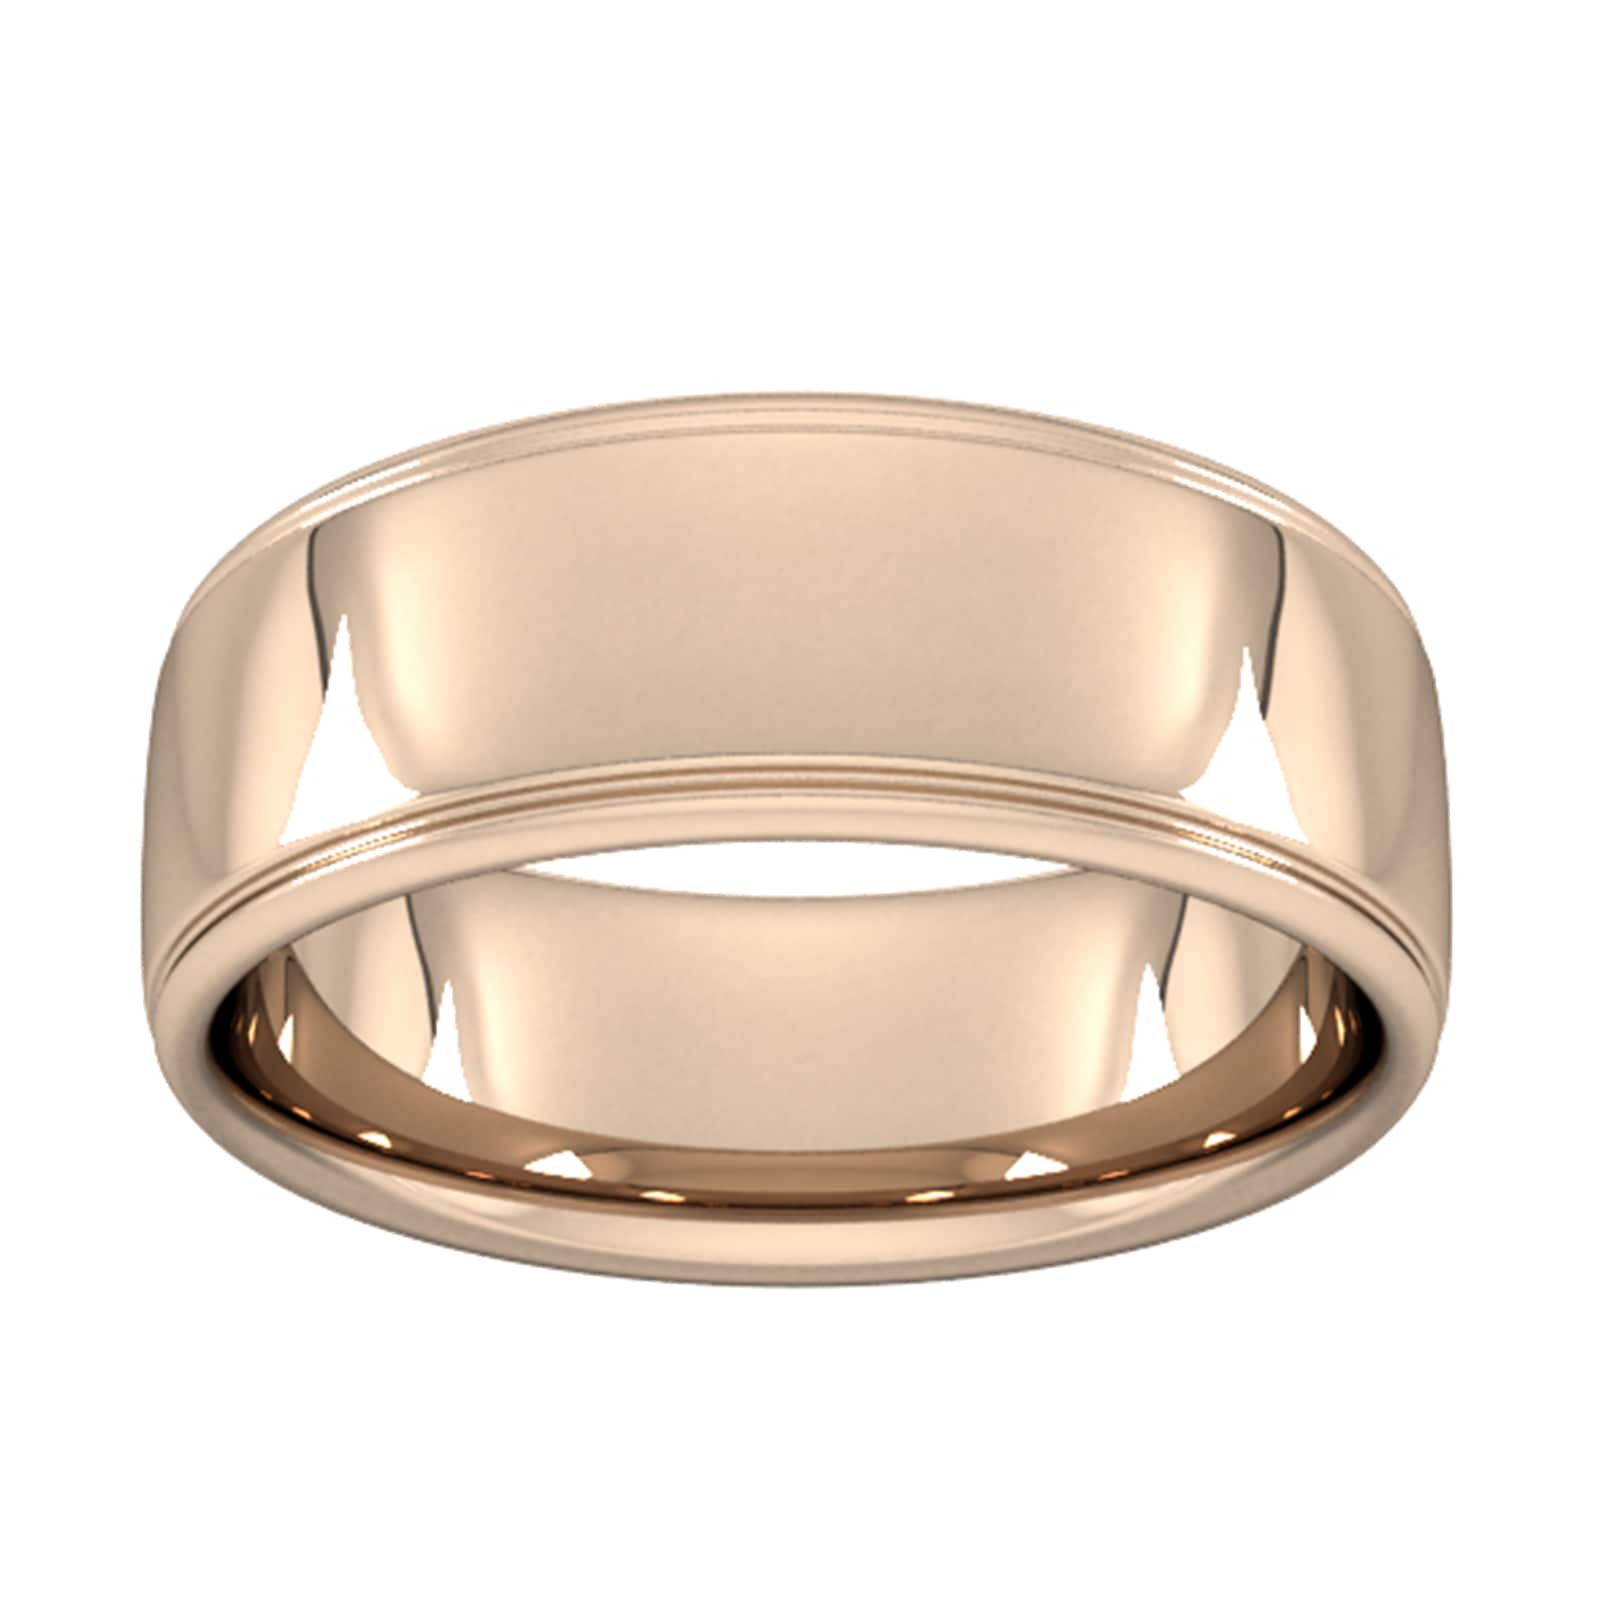 8mm Slight Court Standard Polished Finish With Grooves Wedding Ring In 18 Carat Rose Gold - Ring Size P